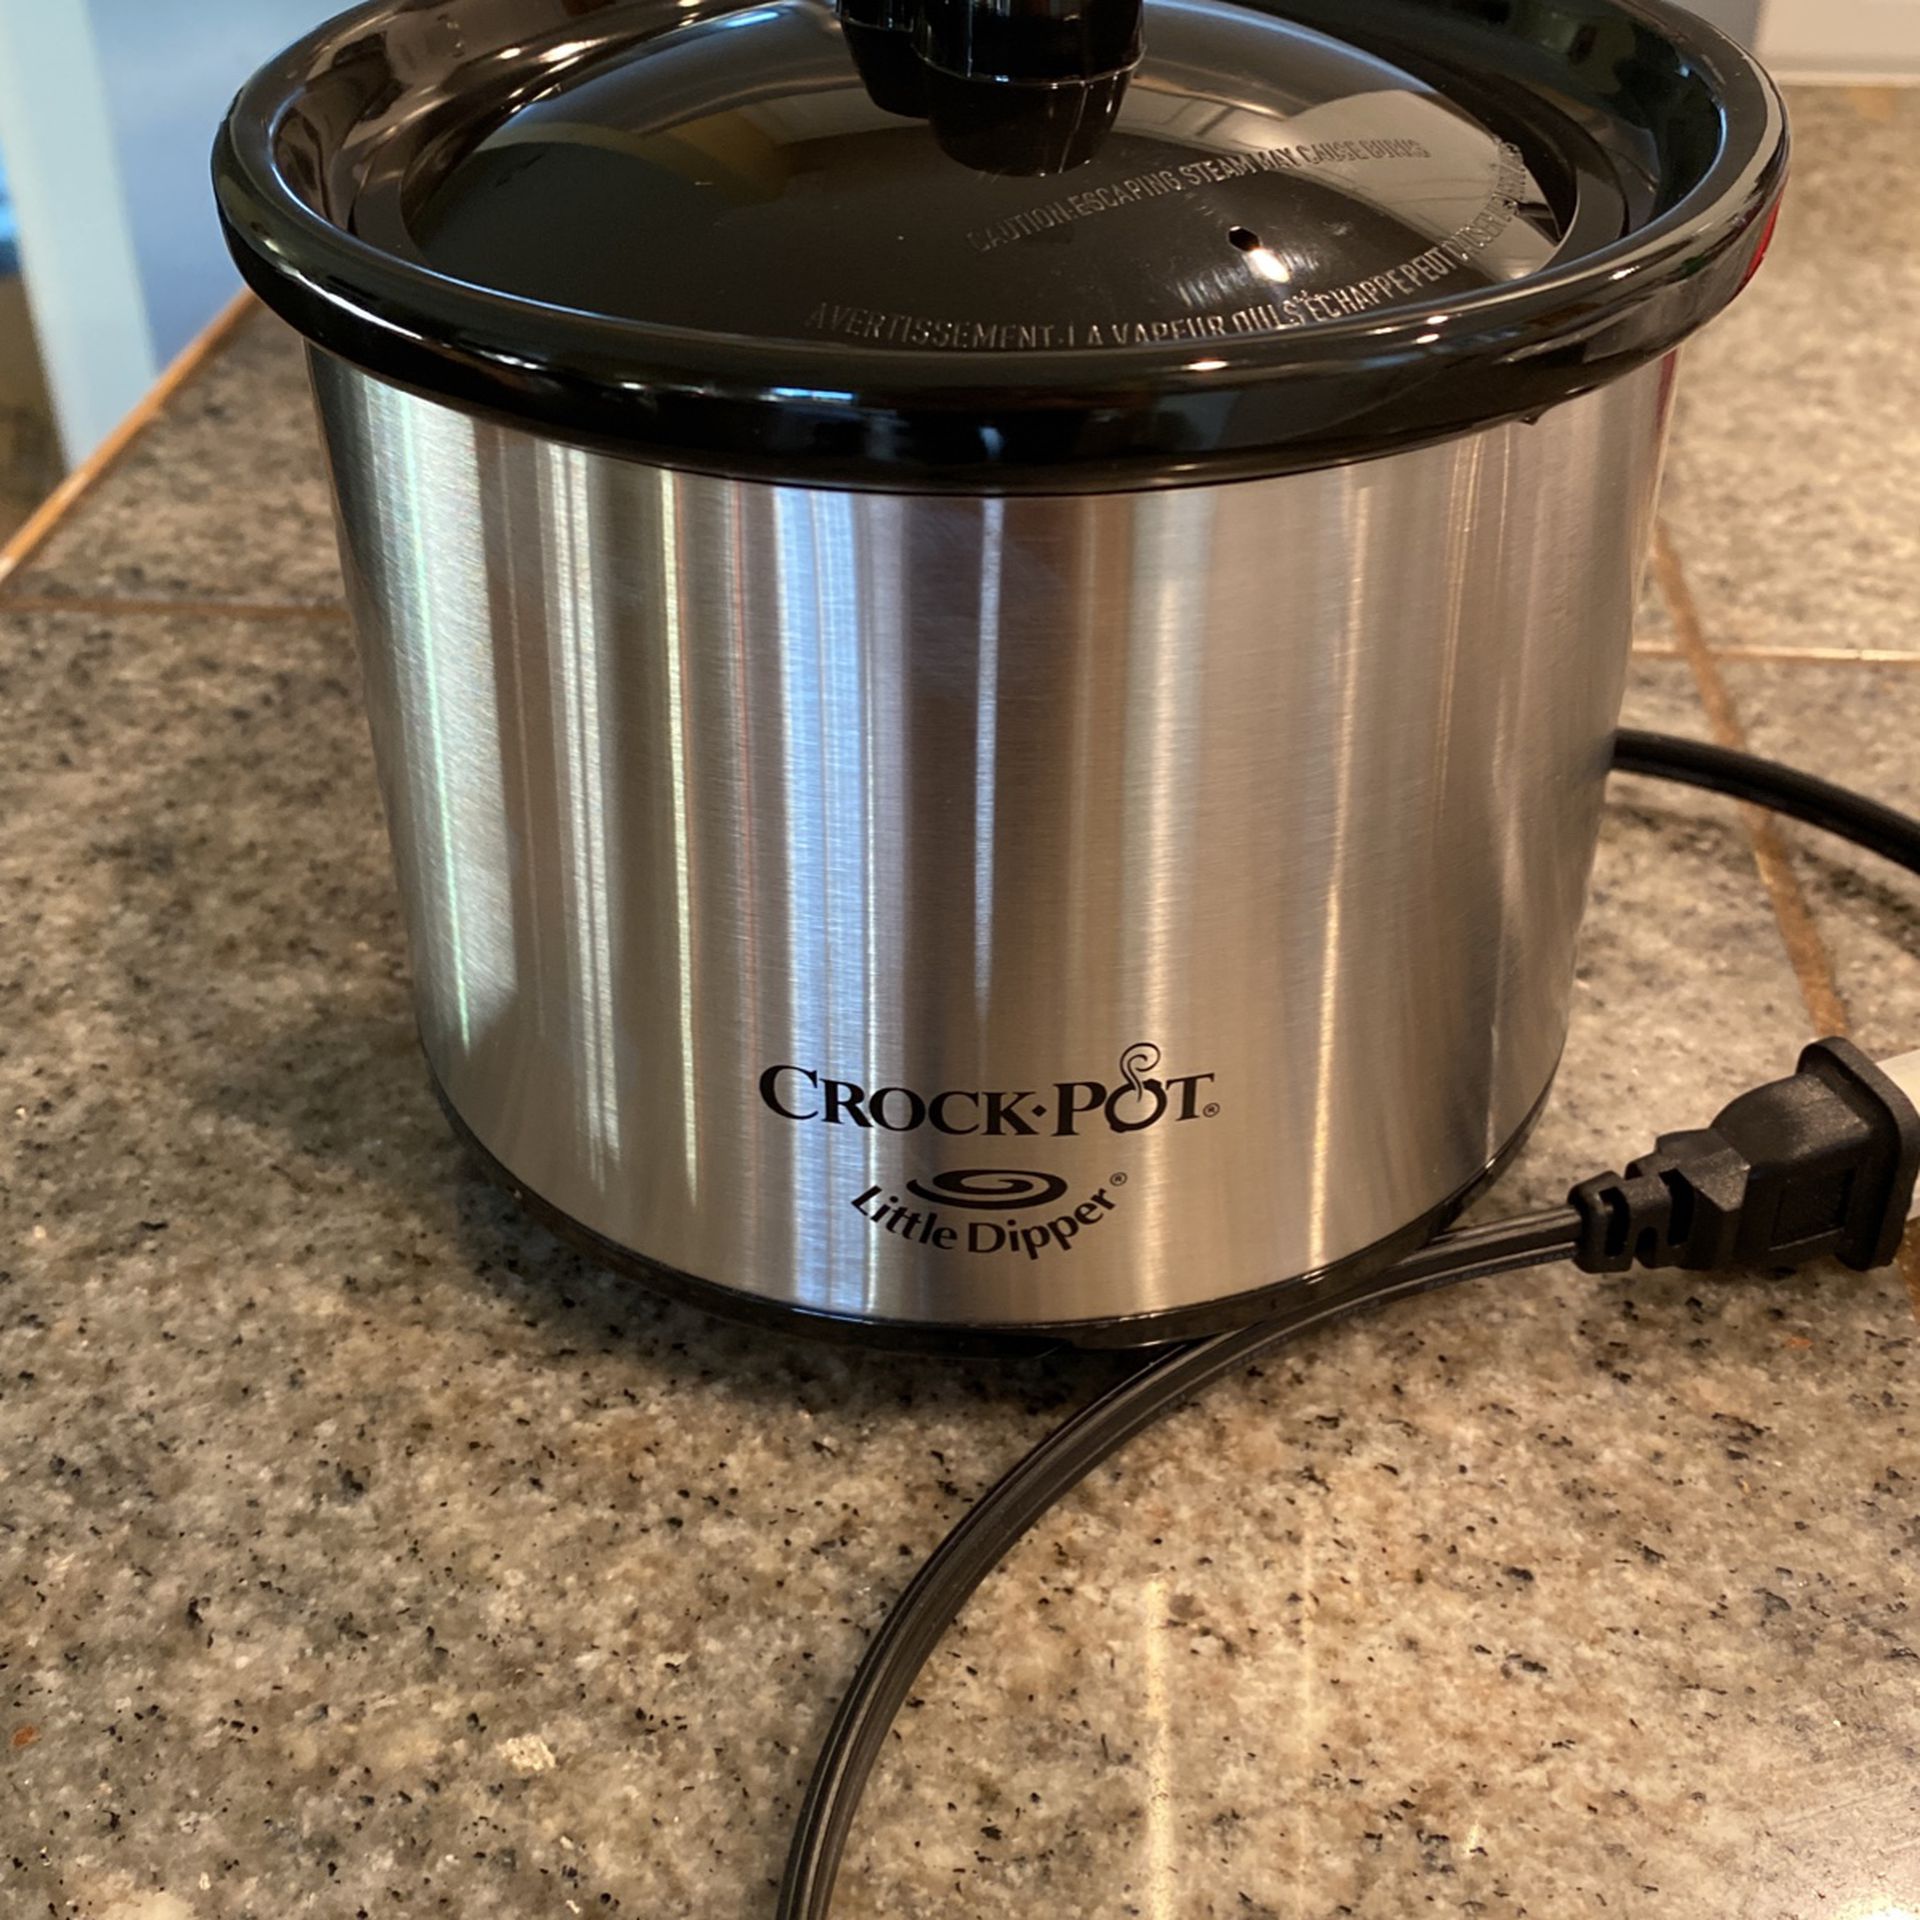 Little Dipper - Mini Crockpot For Dips And Stuff for Sale in Tacoma, WA -  OfferUp